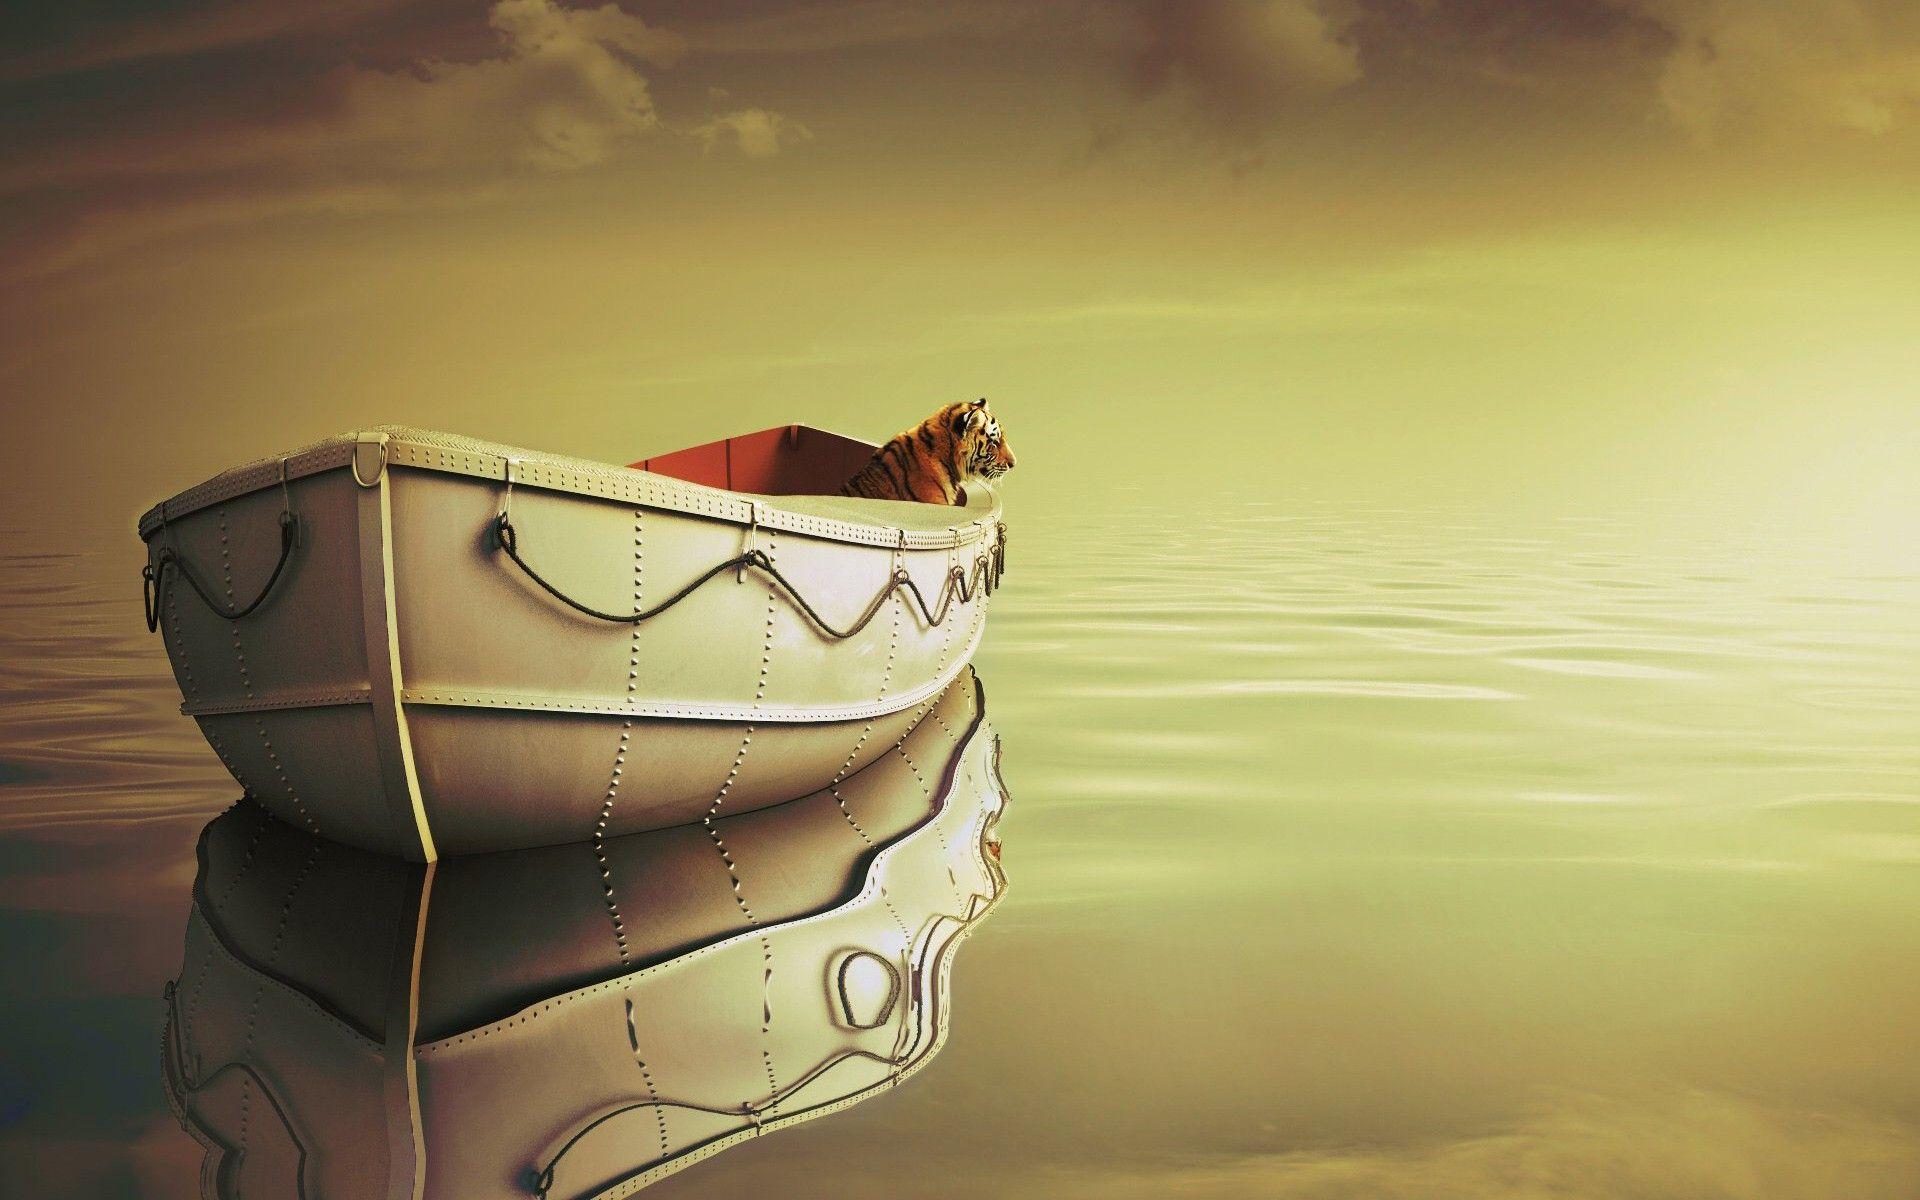 Life Of Pi Boat, HD Movies, 4k Wallpaper, Image, Background